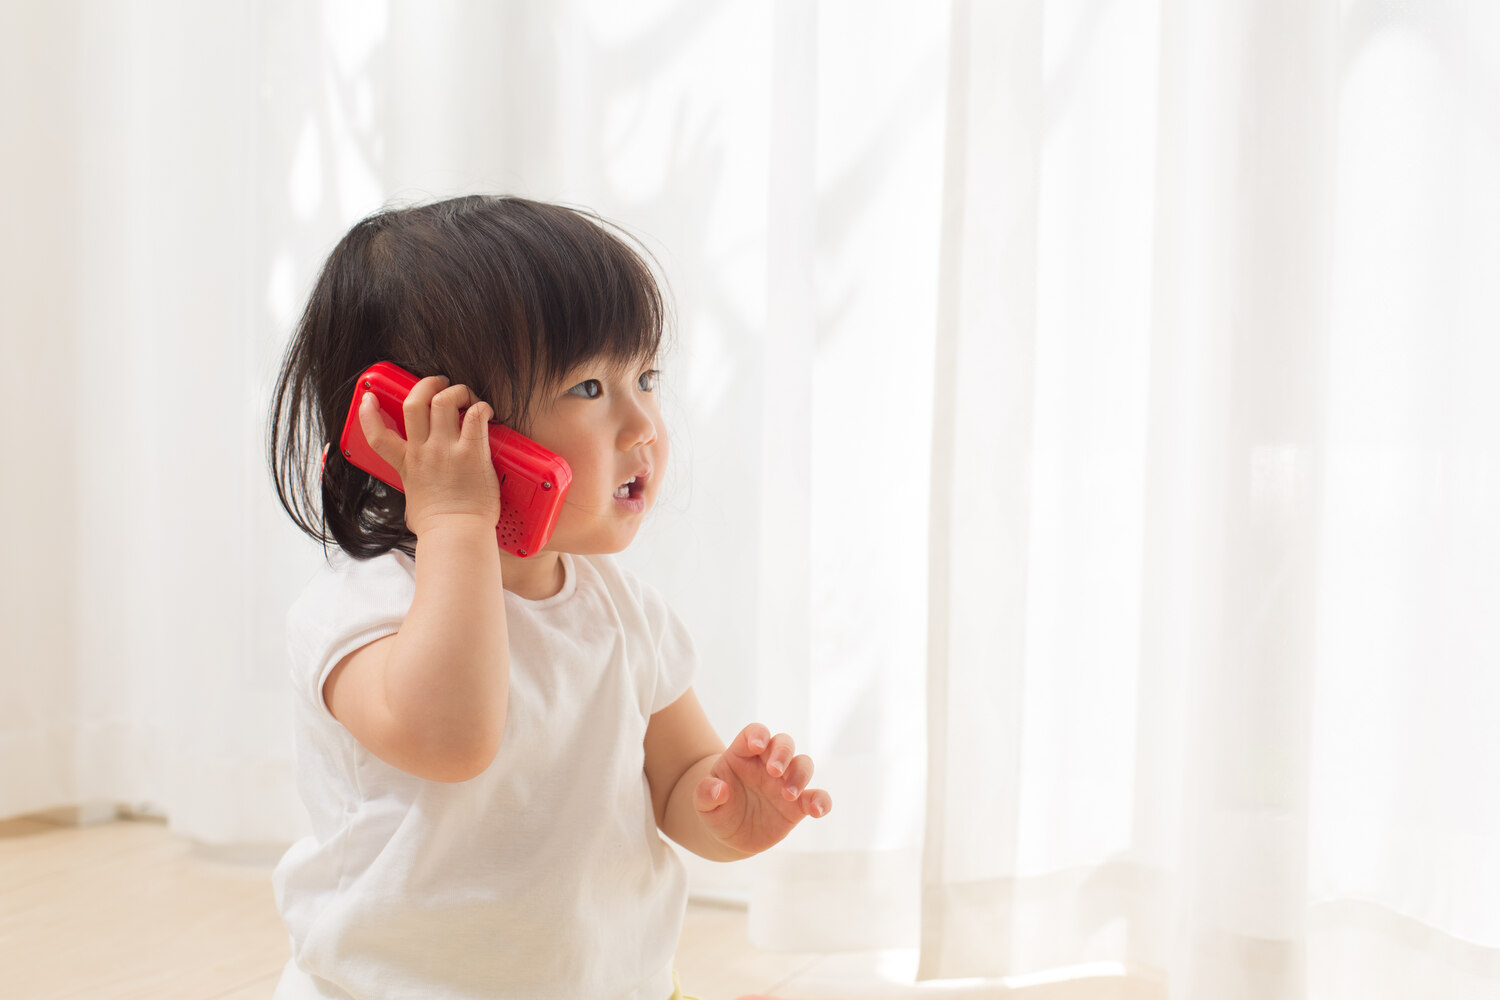 Your toddler's language skills are developing